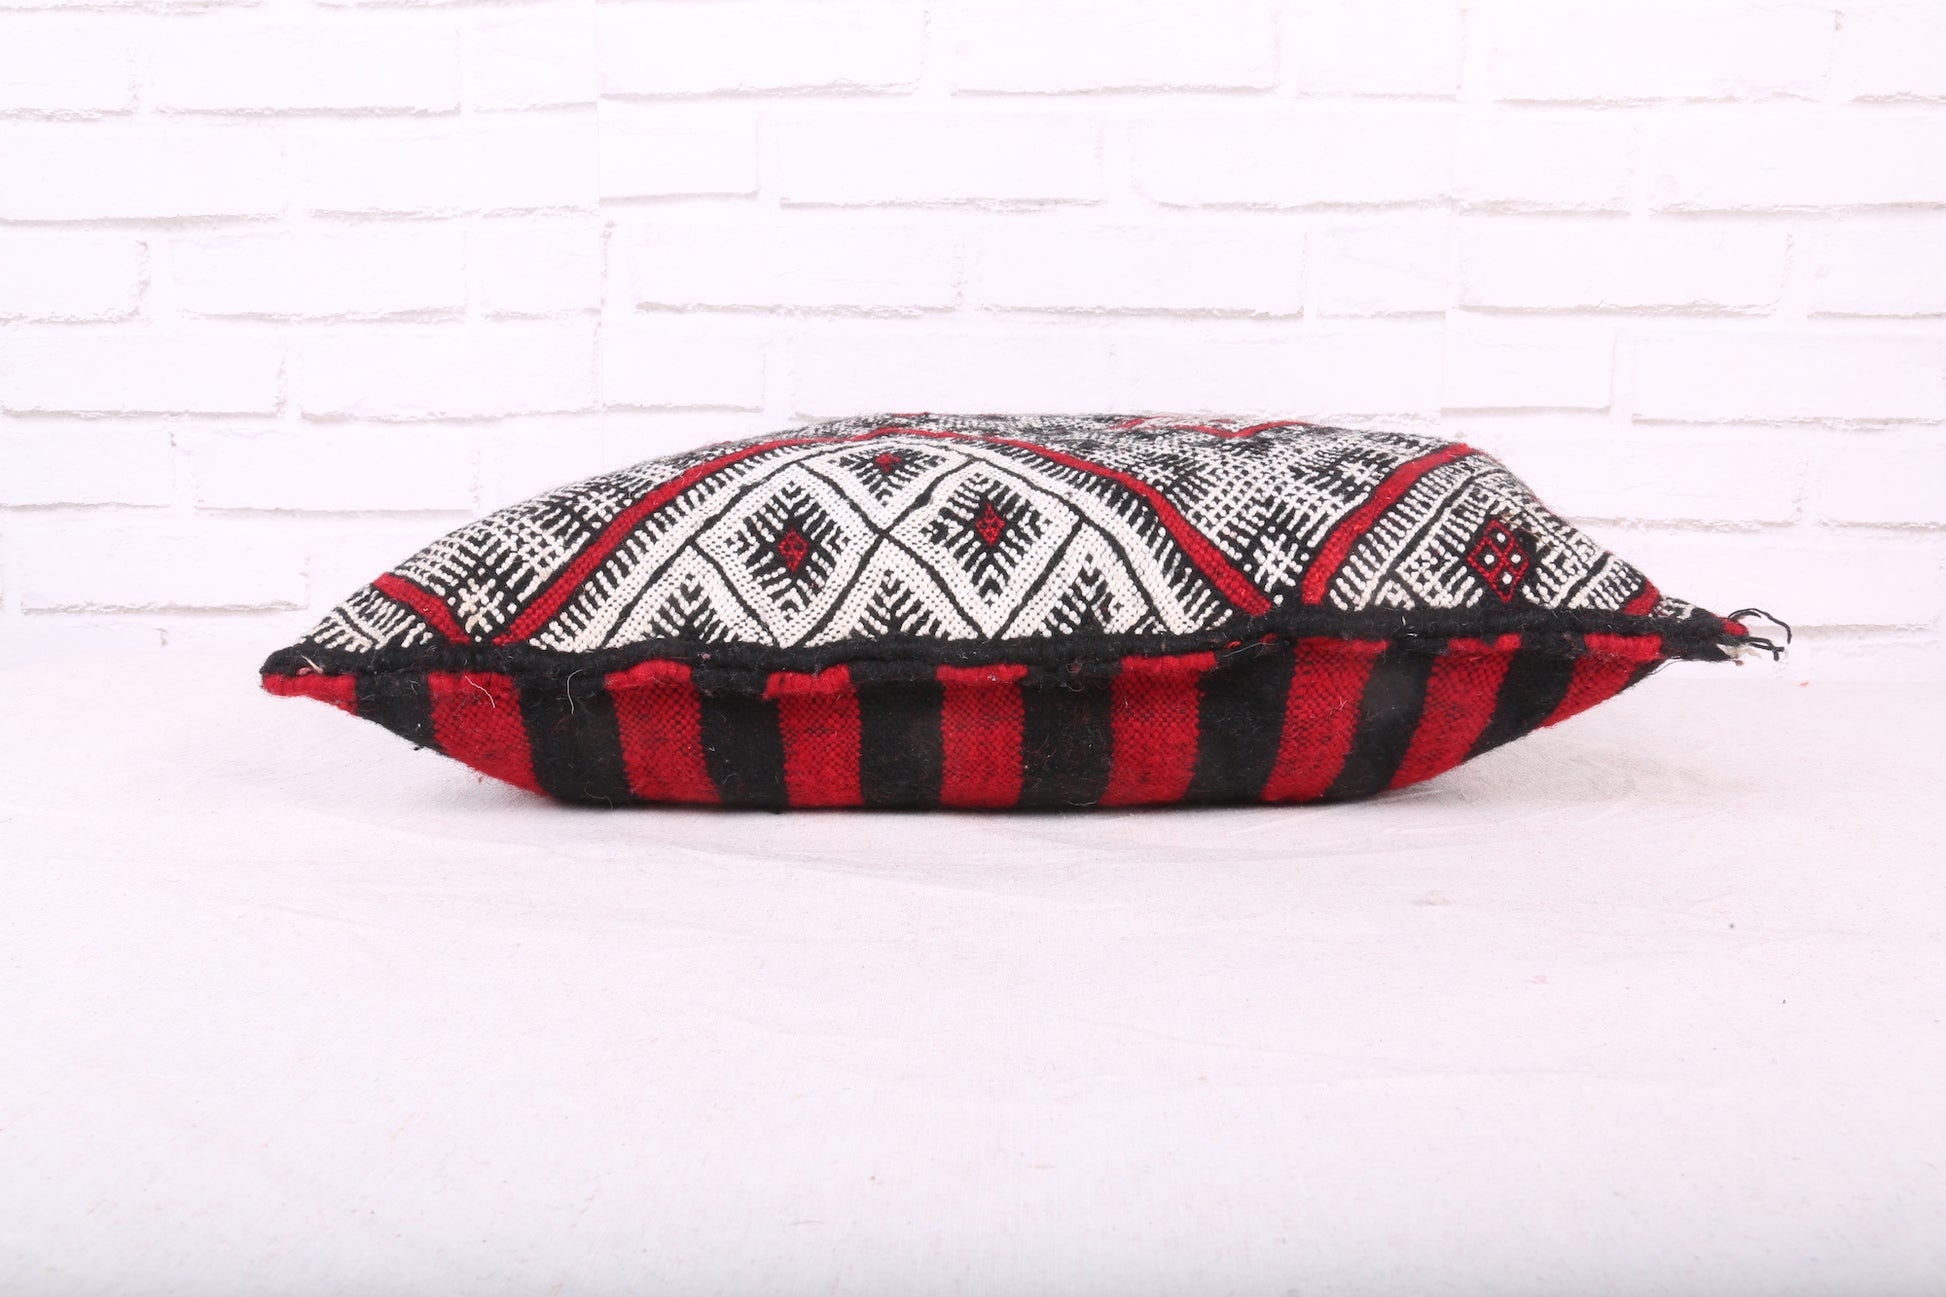 Moroccan pillow rug kilim 16.1 inches X 20 inches